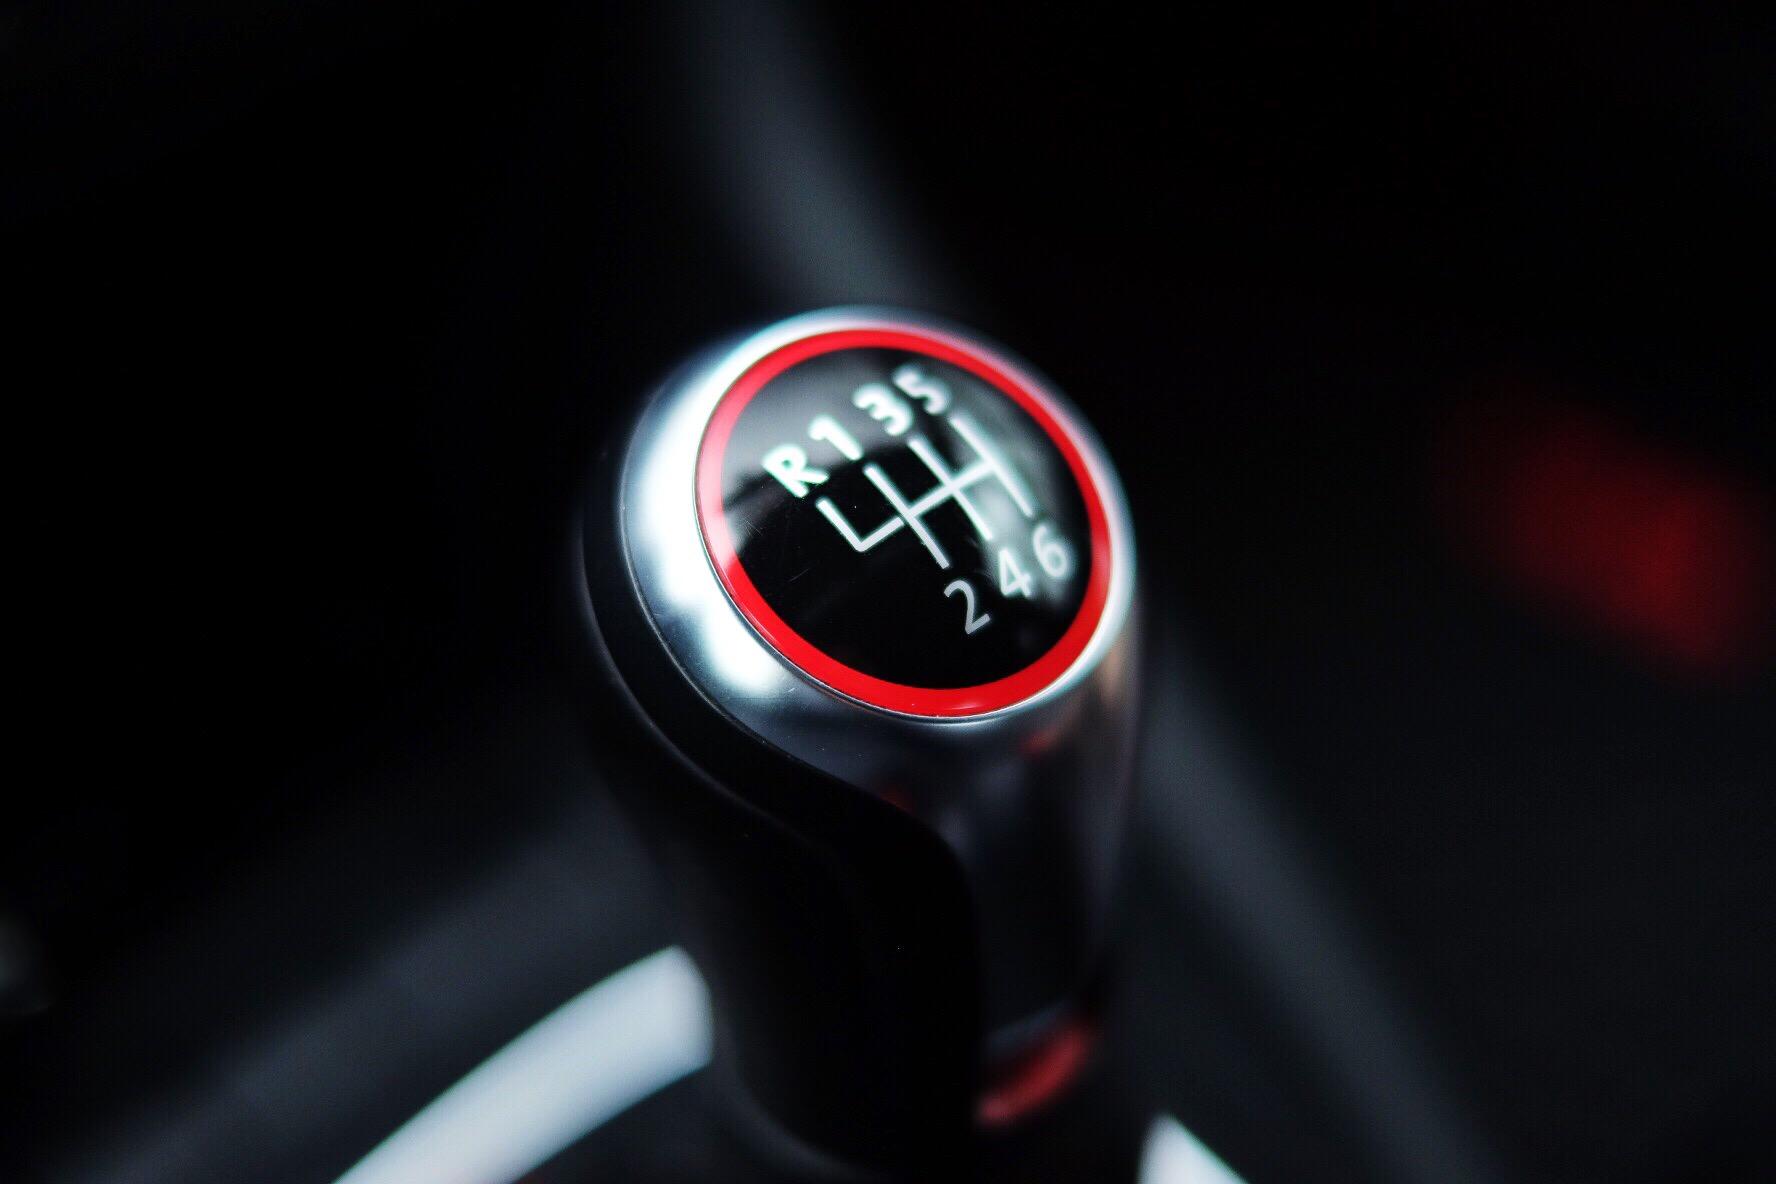 Manual transmission cars are going extinct in the United States.